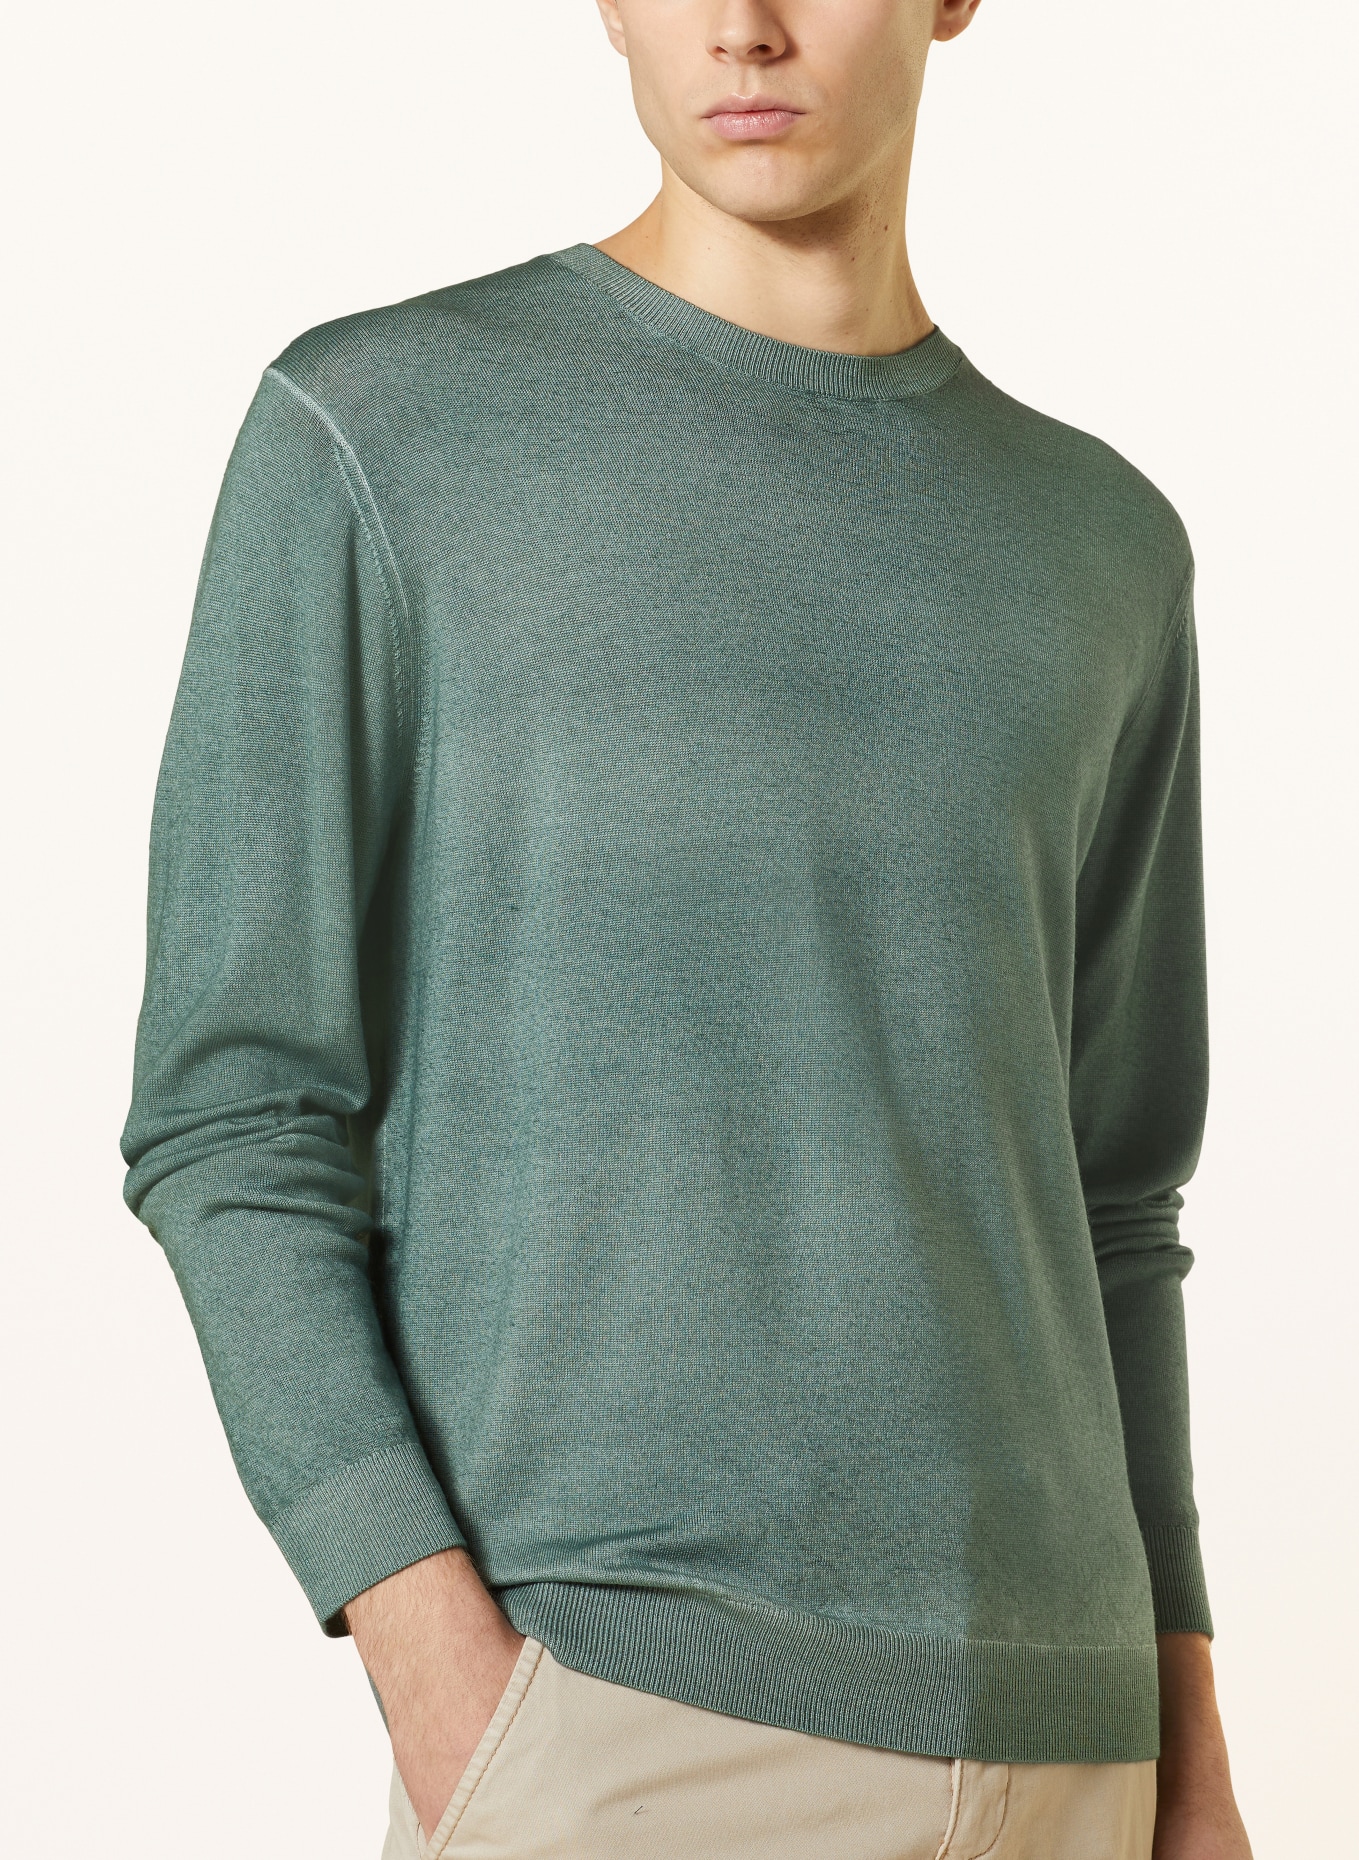 STROKESMAN'S Sweater, Color: OLIVE (Image 4)